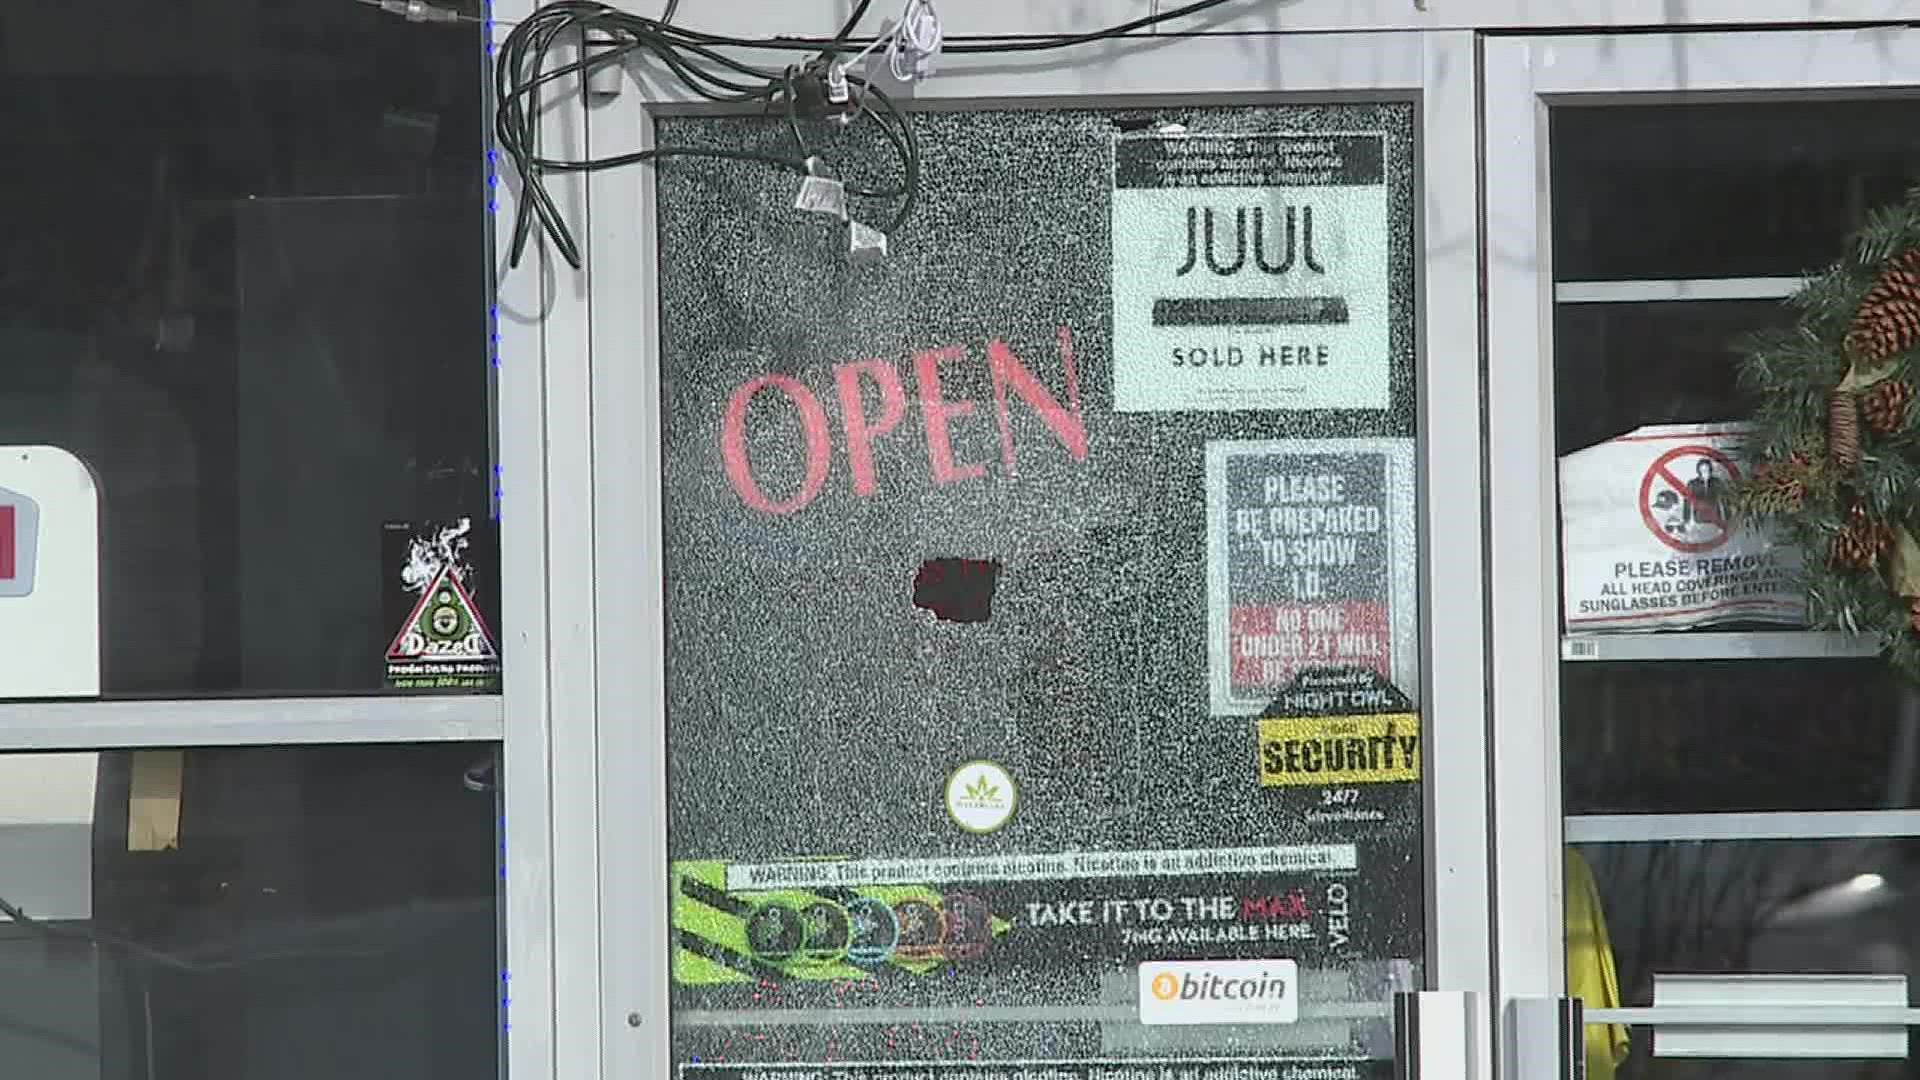 An overnight shooting at a Rock Island vape shop left one person dead in an attempted robbery.